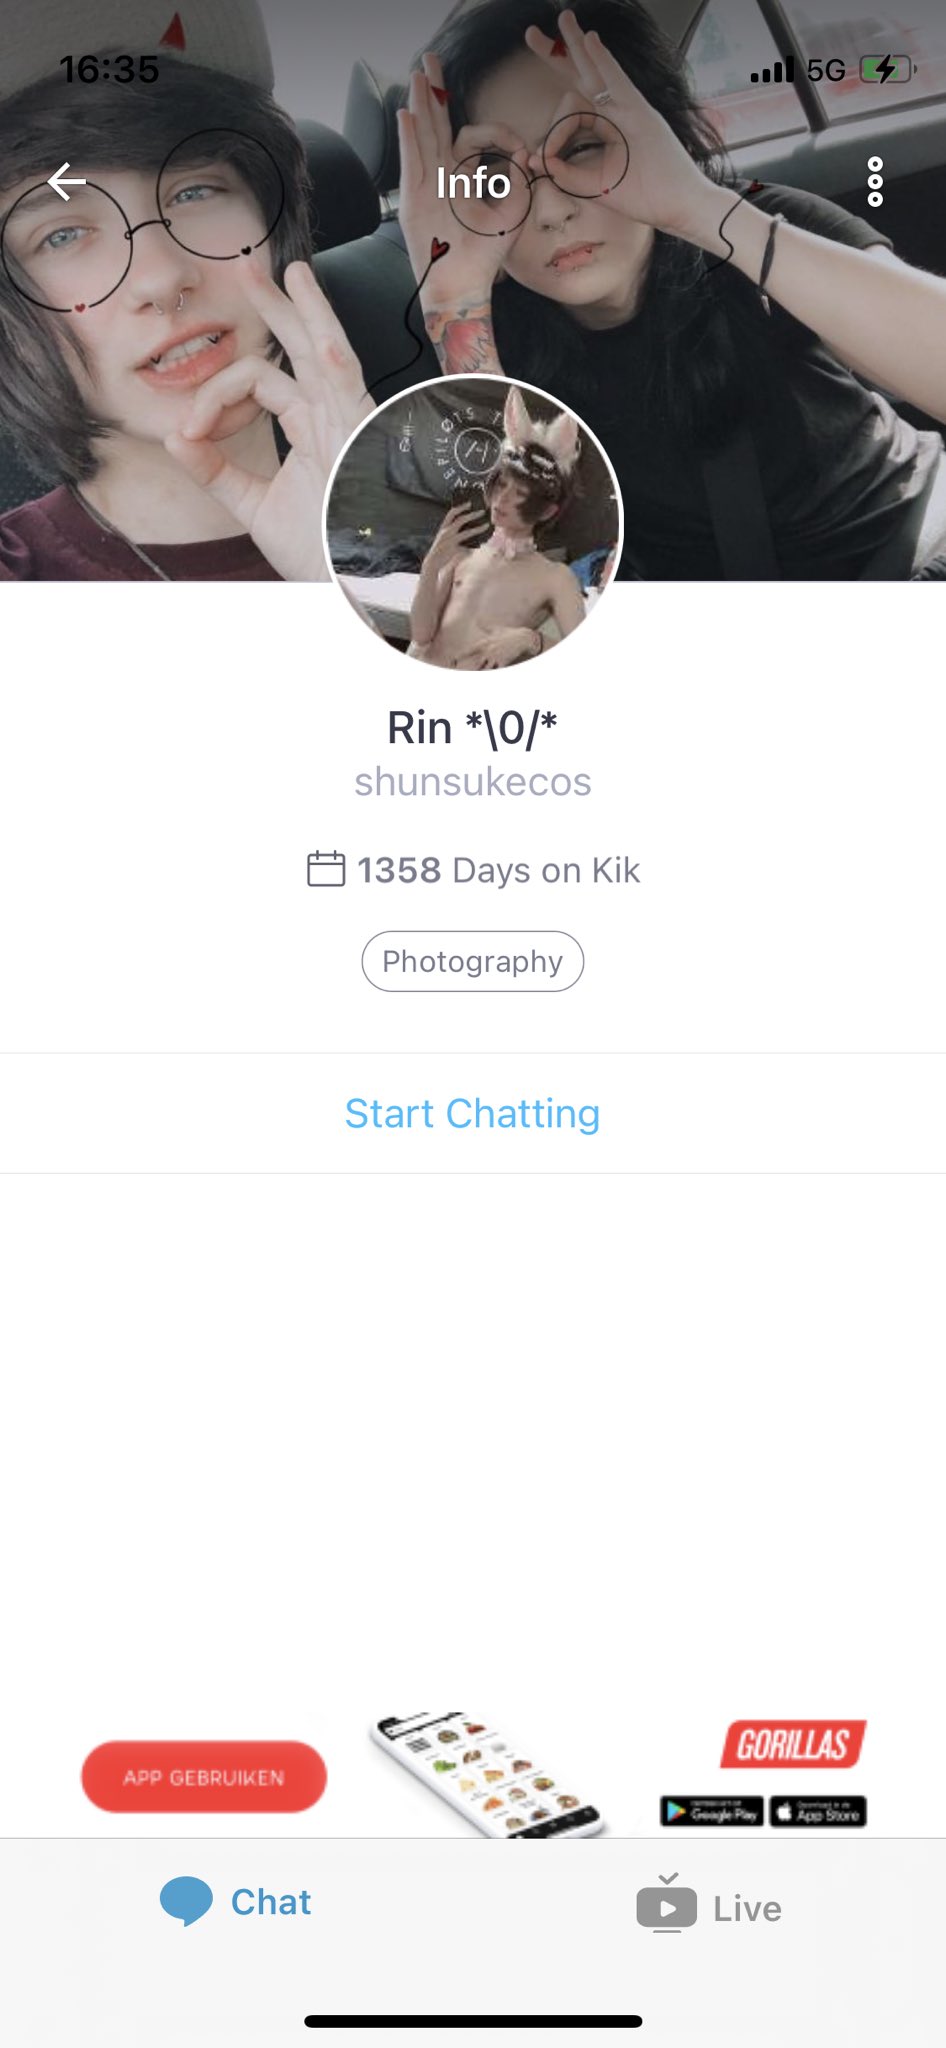 Rin 🐰 on X: This dude is pretending to be me on kik and sharing my nudes,  idk how to get them removed so this is just serving as a warning not